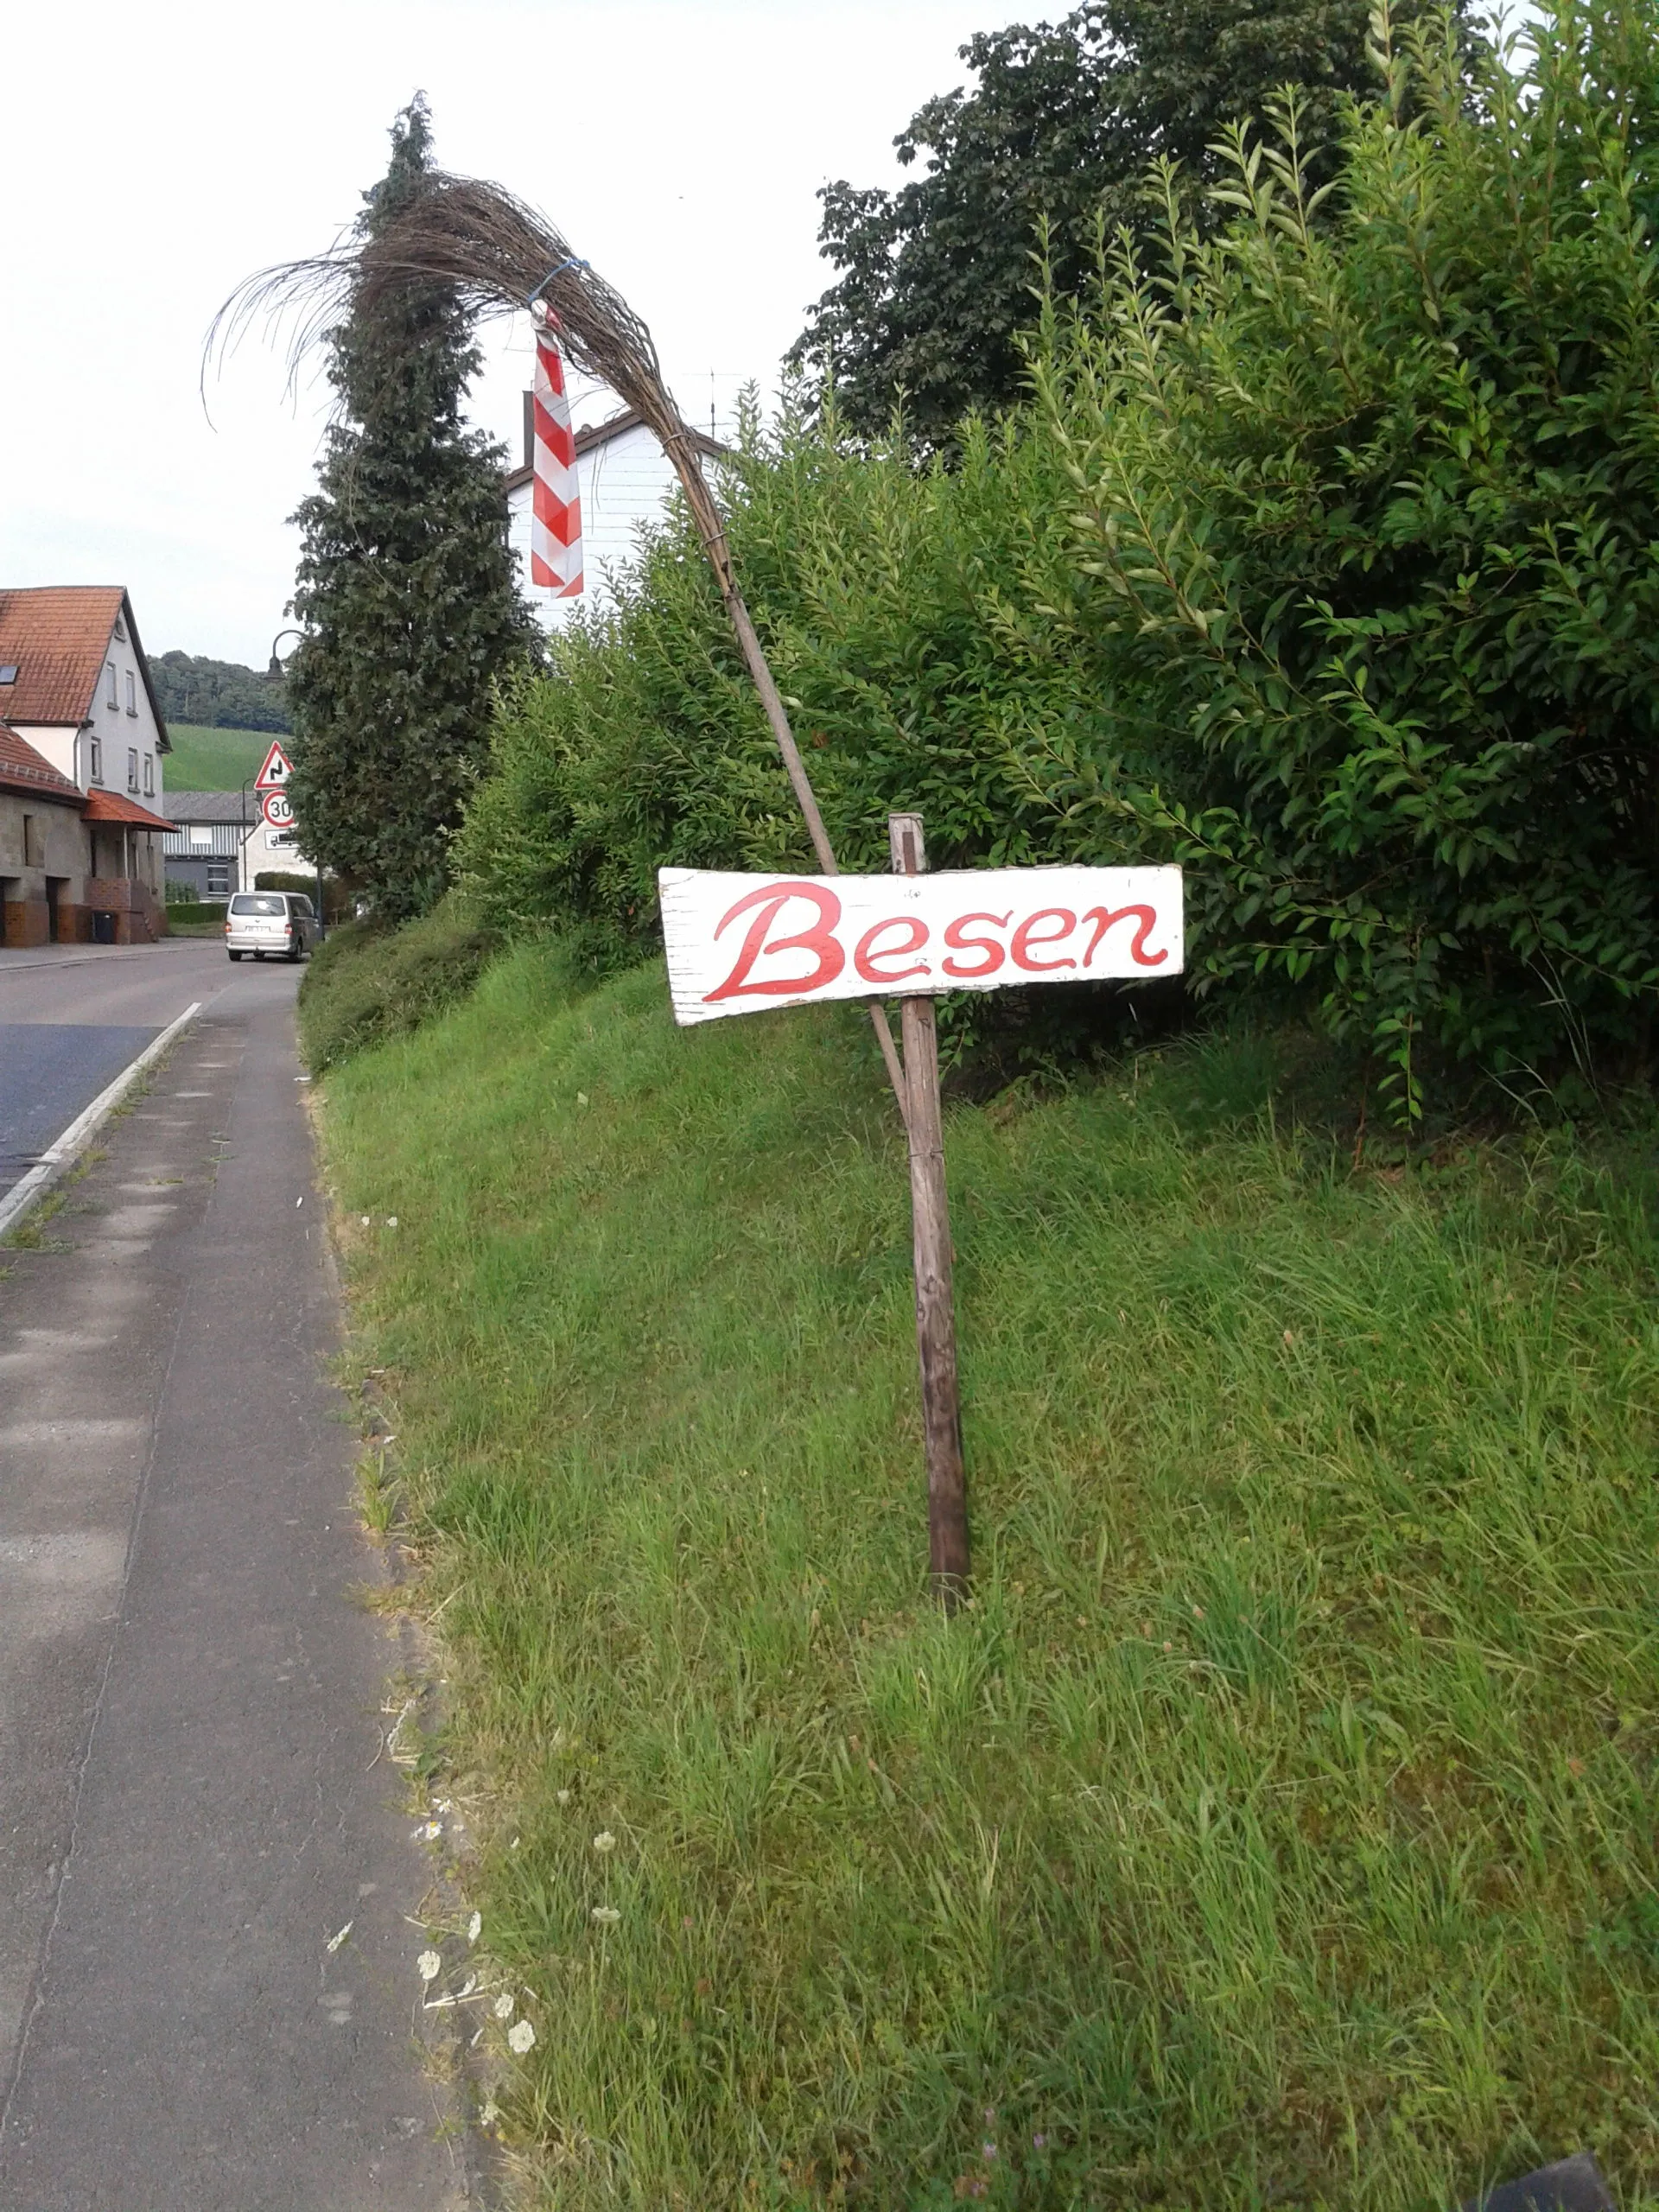 Photo showing: Broom - sign for: The special kind of wine restaurant (called: Besen, winegrower's new vintage outlet, here concretely the wine restaurant at Eberstadt-Hölzern near Heilbronn, Germany) is opened